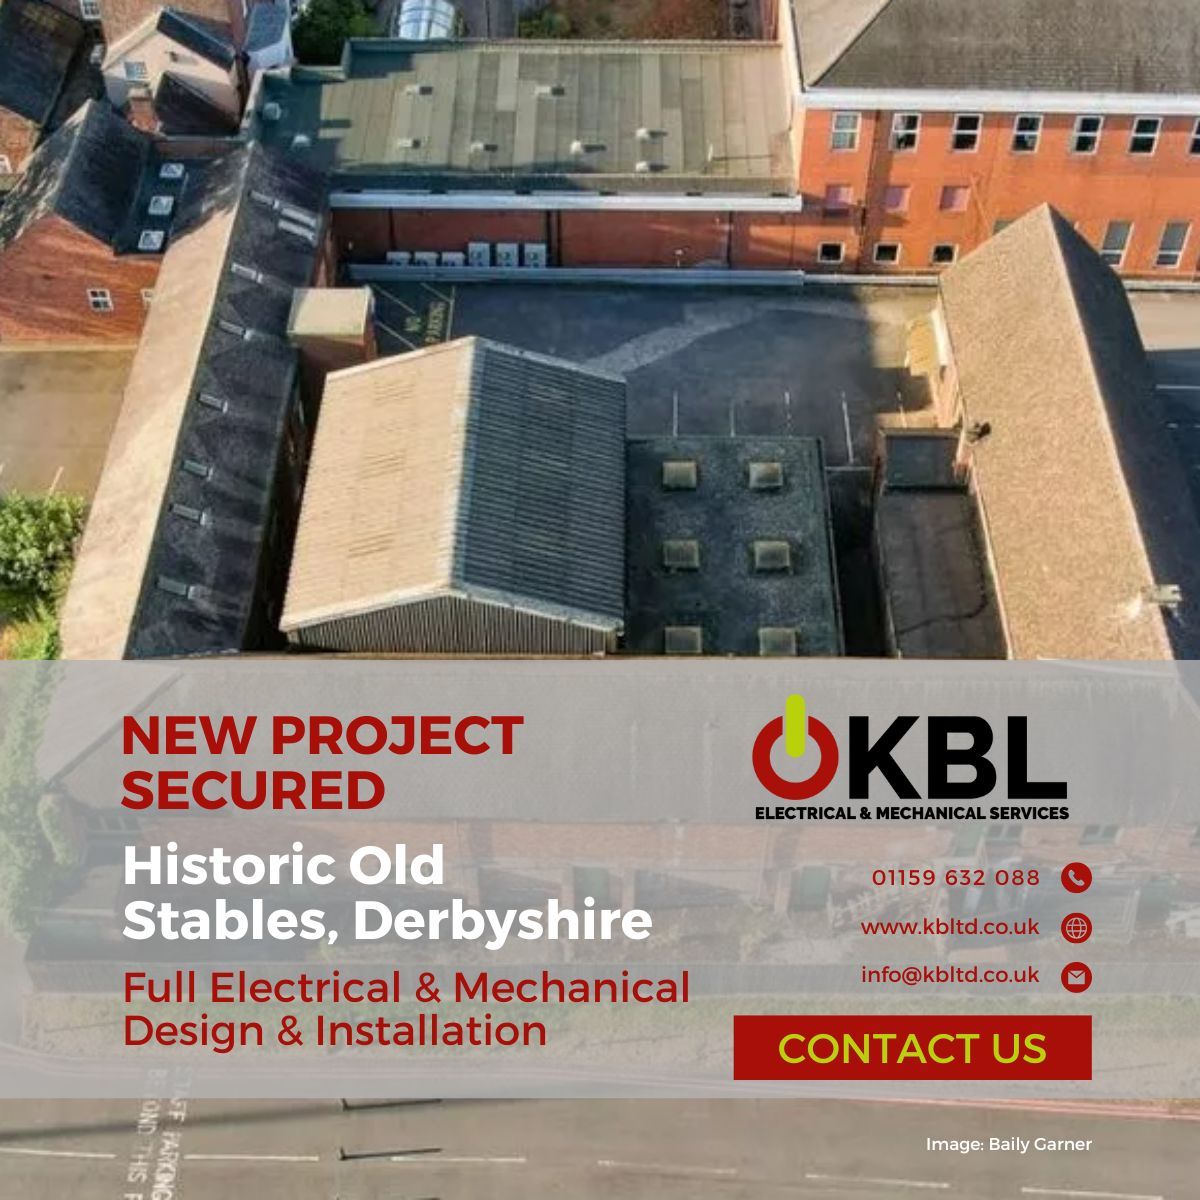 Our latest secured project, 'The Old Stables' in Derbyshire town centre. KBL will handle the D&B M&E works for this venture. The Grade 2 stables will be refurbished into studio offices. Stay tuned for updates!

#electricalengineer #mechanicalengineer #electrical #mechanical